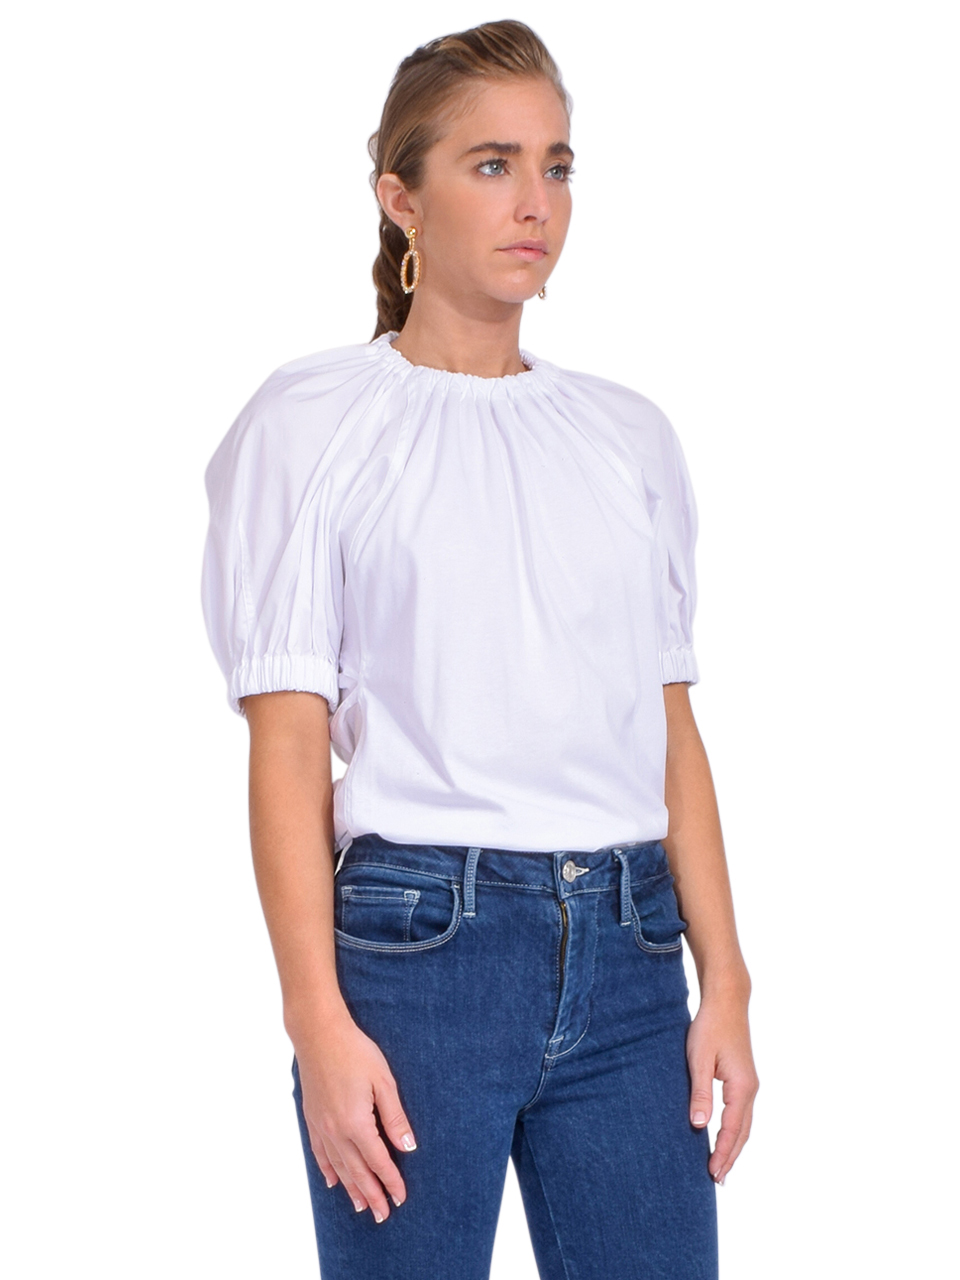 3.1 Phillip Lim Shirred Puff Sleeve Combo T-Shirt in White Side View 